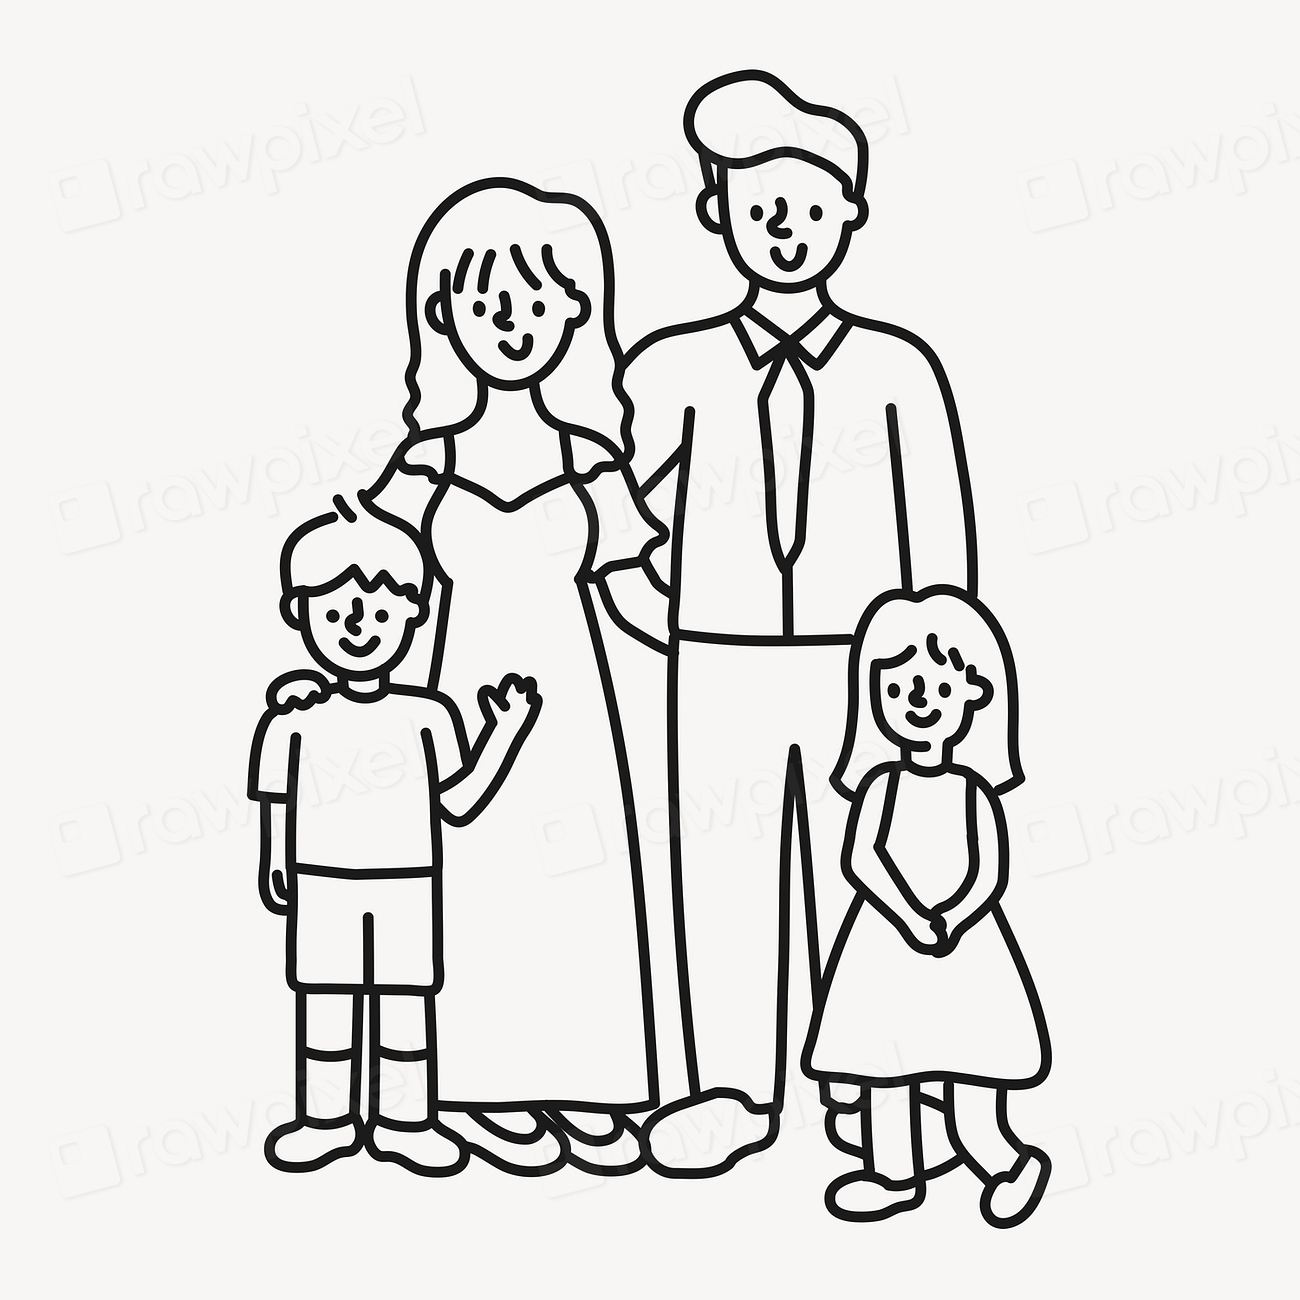 Nuclear family clipart, drawing design Free Photo Illustration rawpixel